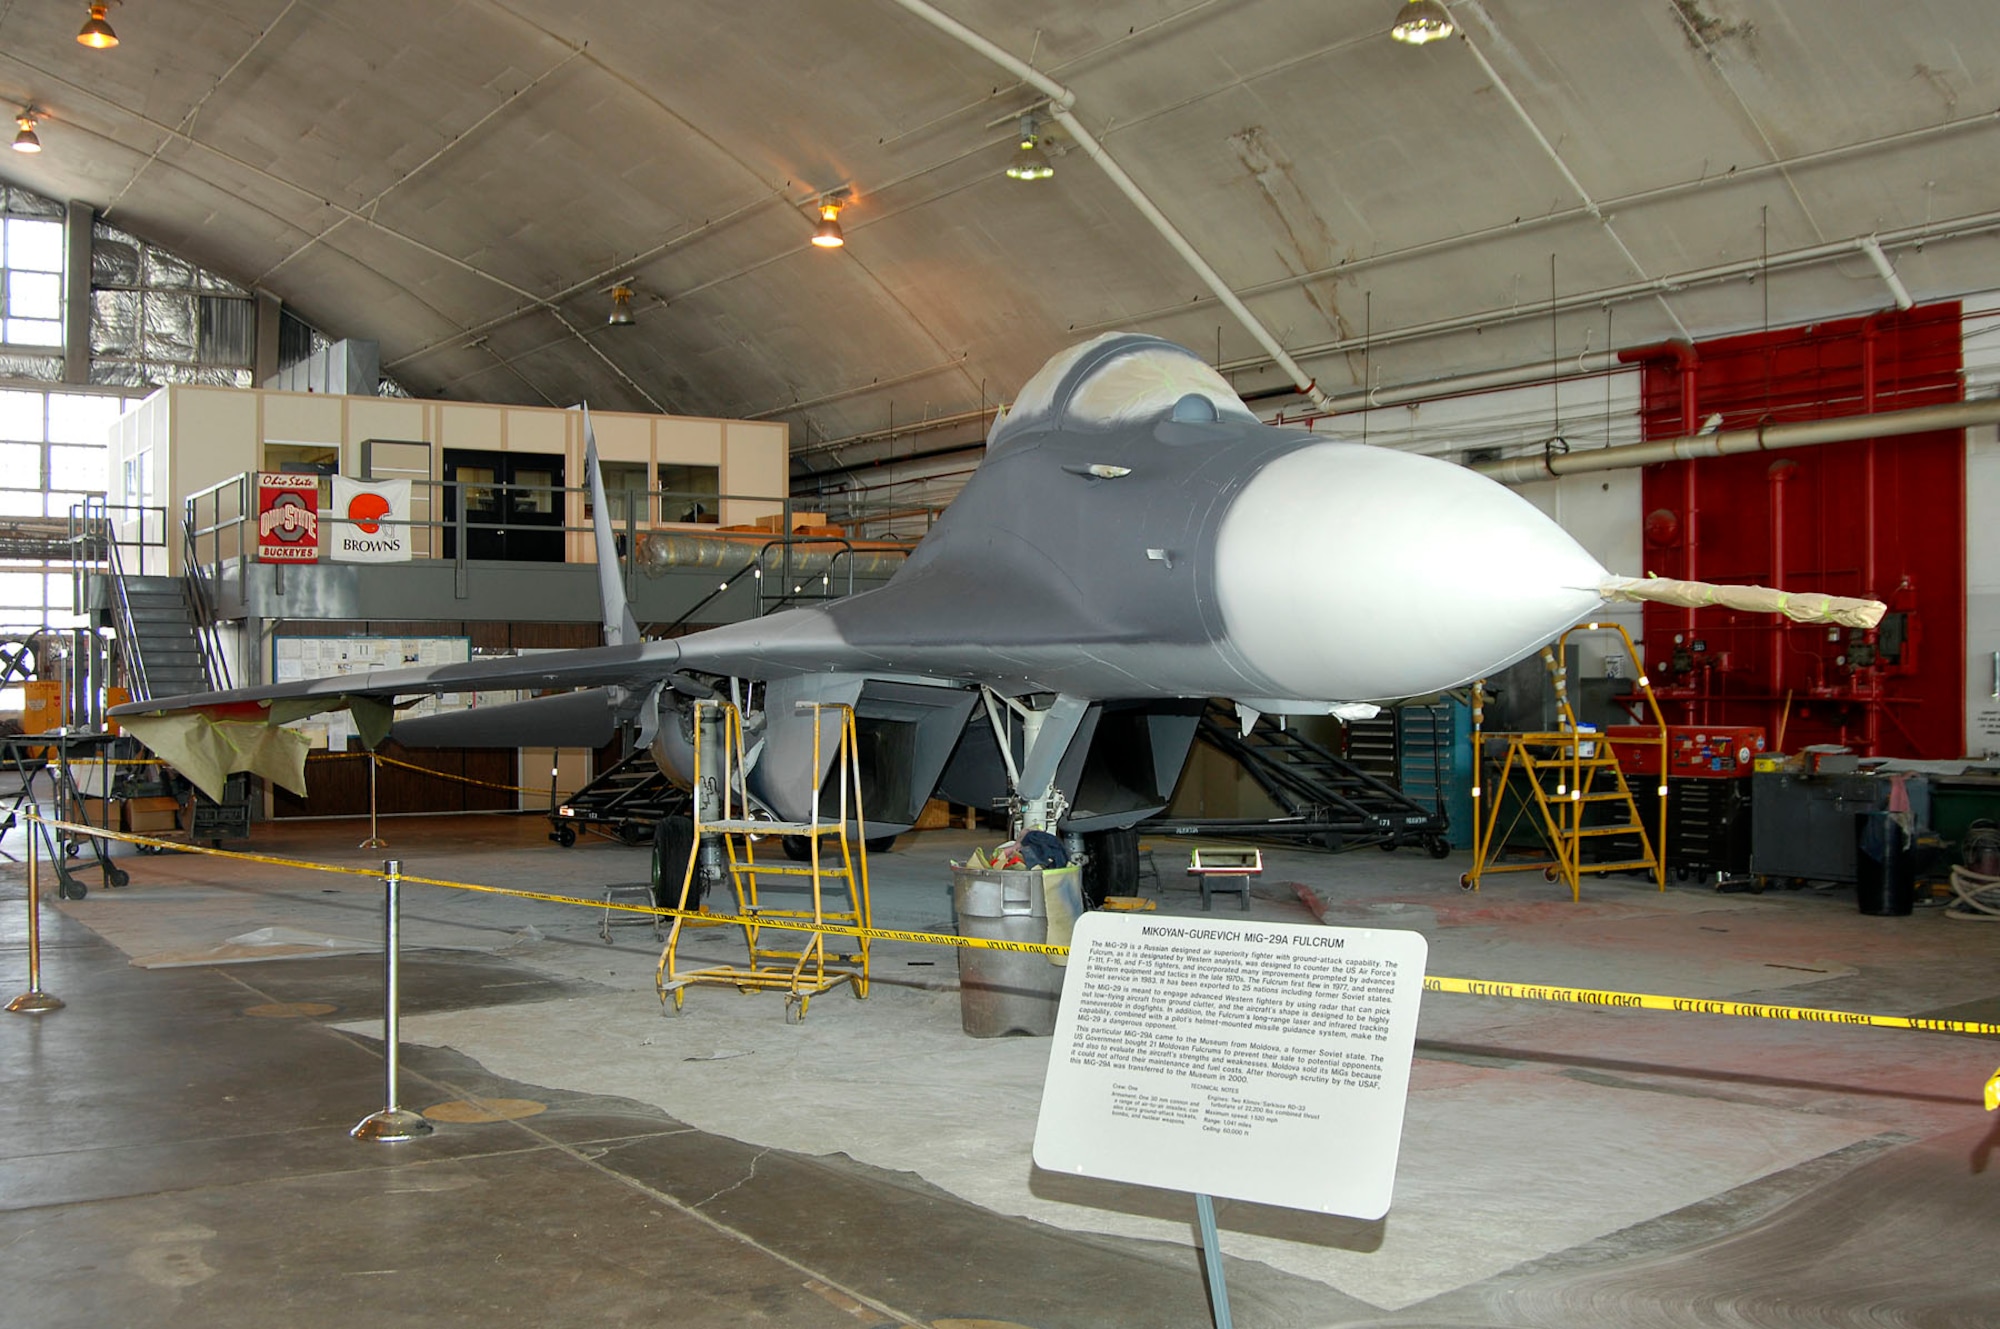 DAYTON, Ohio (02/2007) -- MiG-29A undergoing restoration at the National Museum of the U.S. Air Force (U.S. Air Force photo by Ben Strasser)